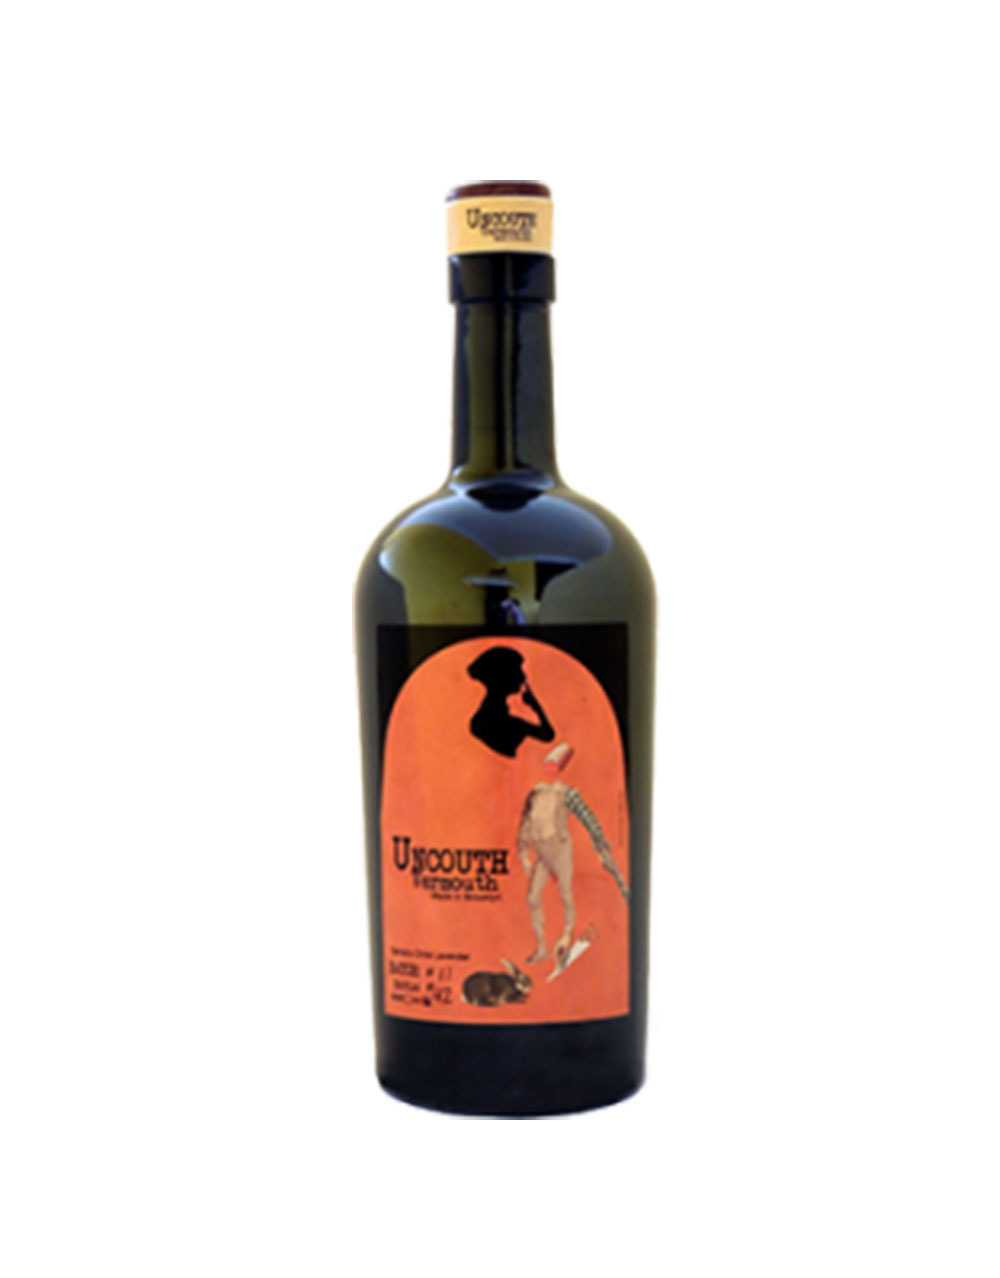 Uncouth Vermouth - Chile